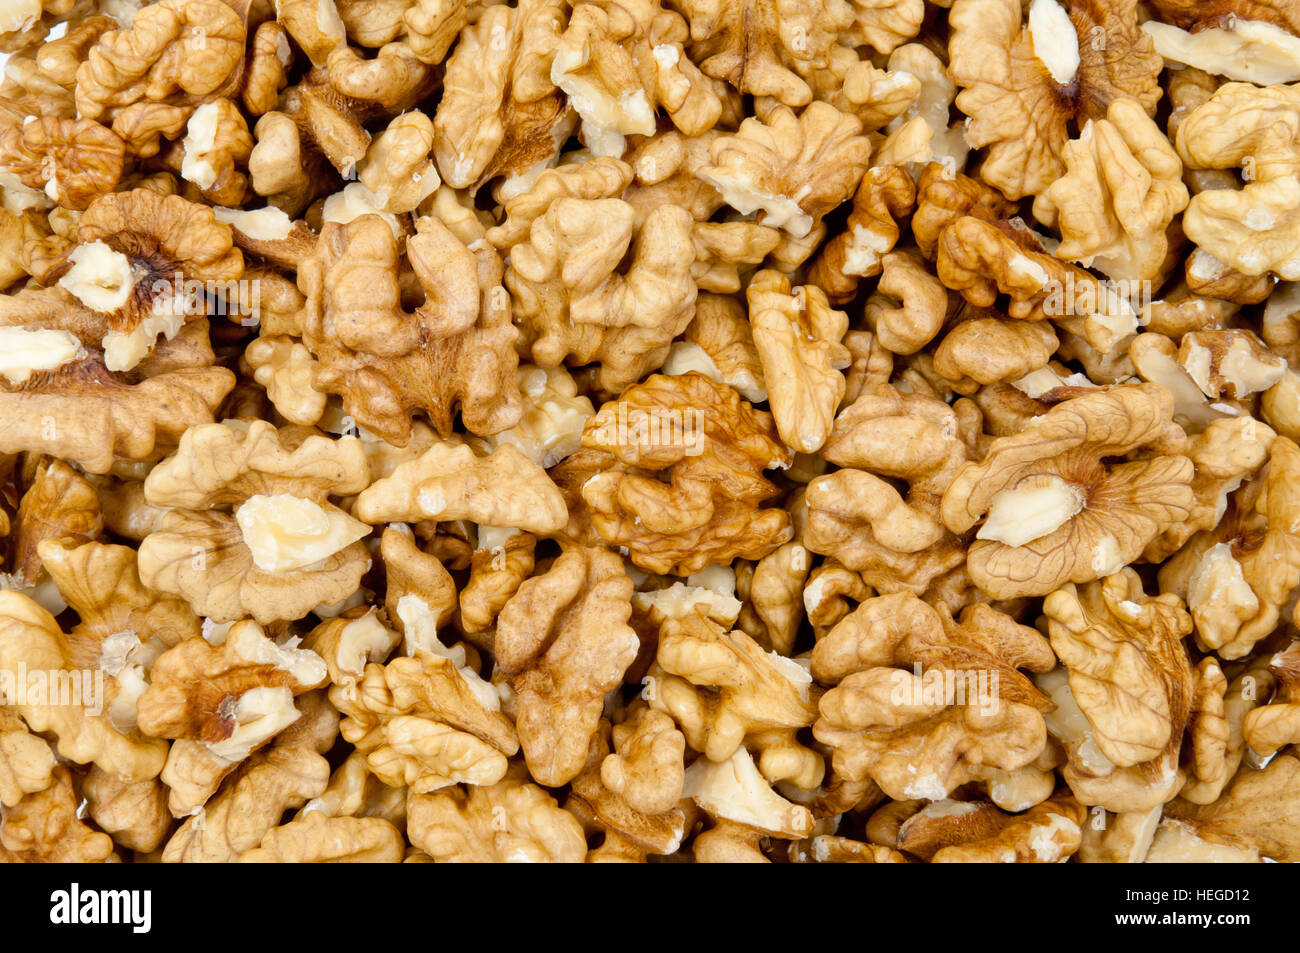 Shelled walnuts pile as background Stock Photo